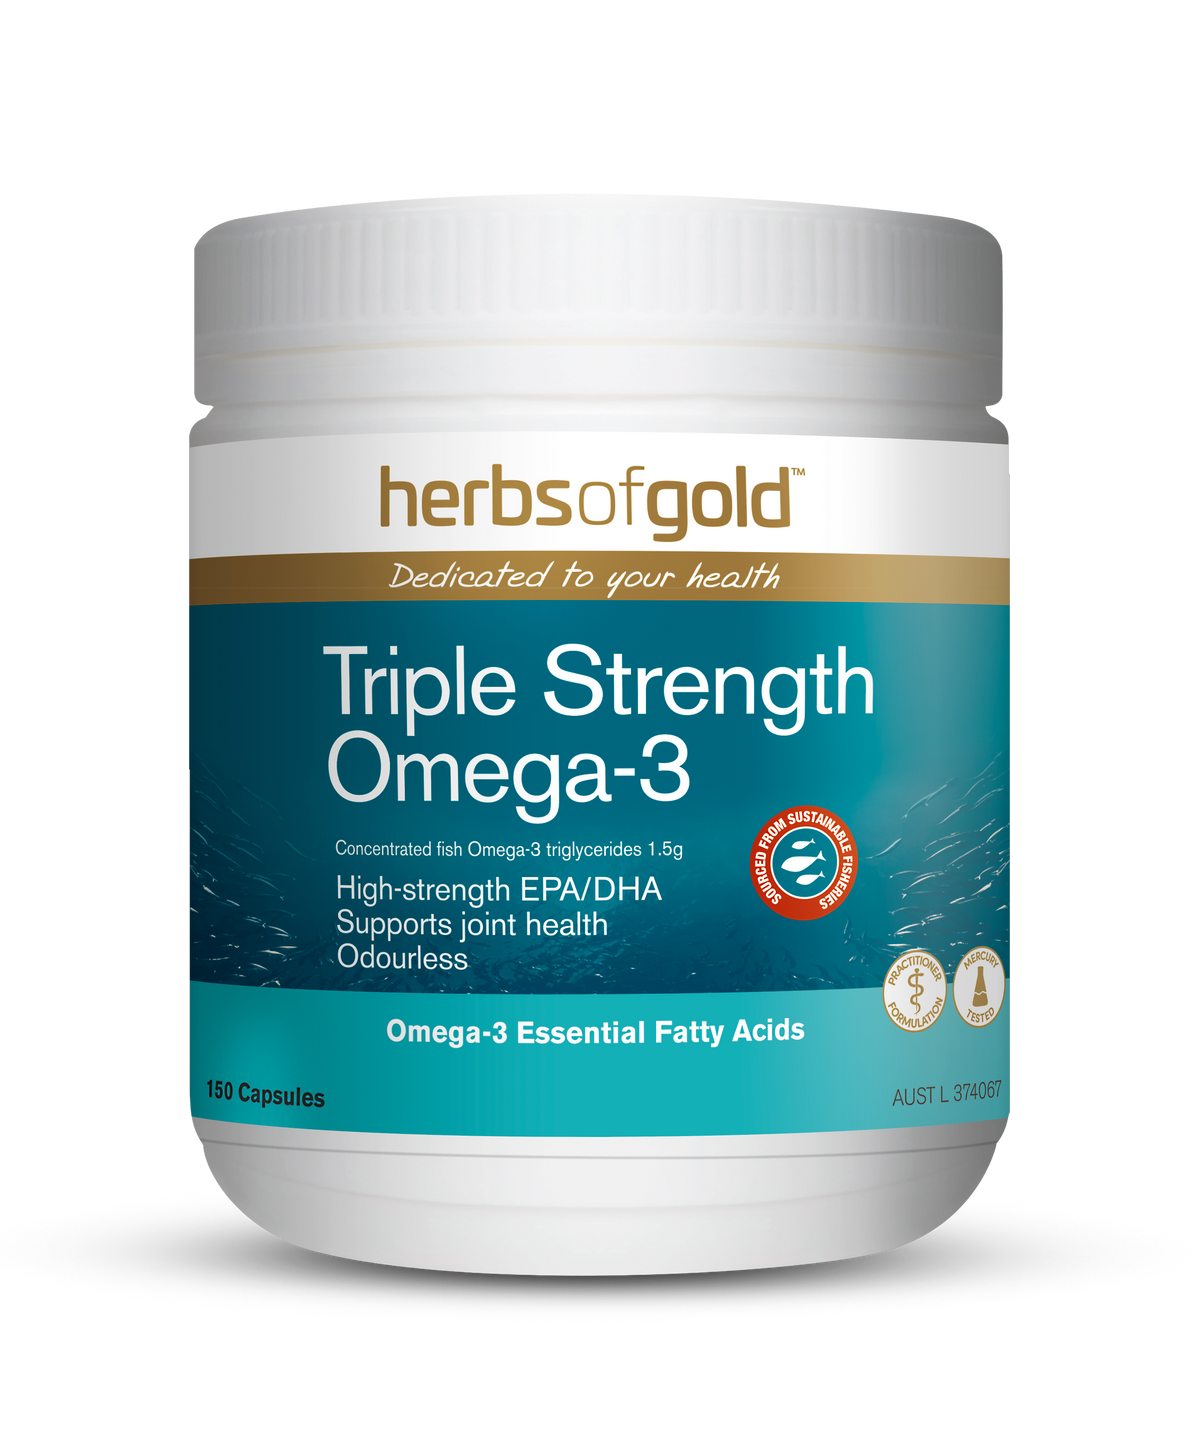 Herbs of Gold Triple Strength Omega